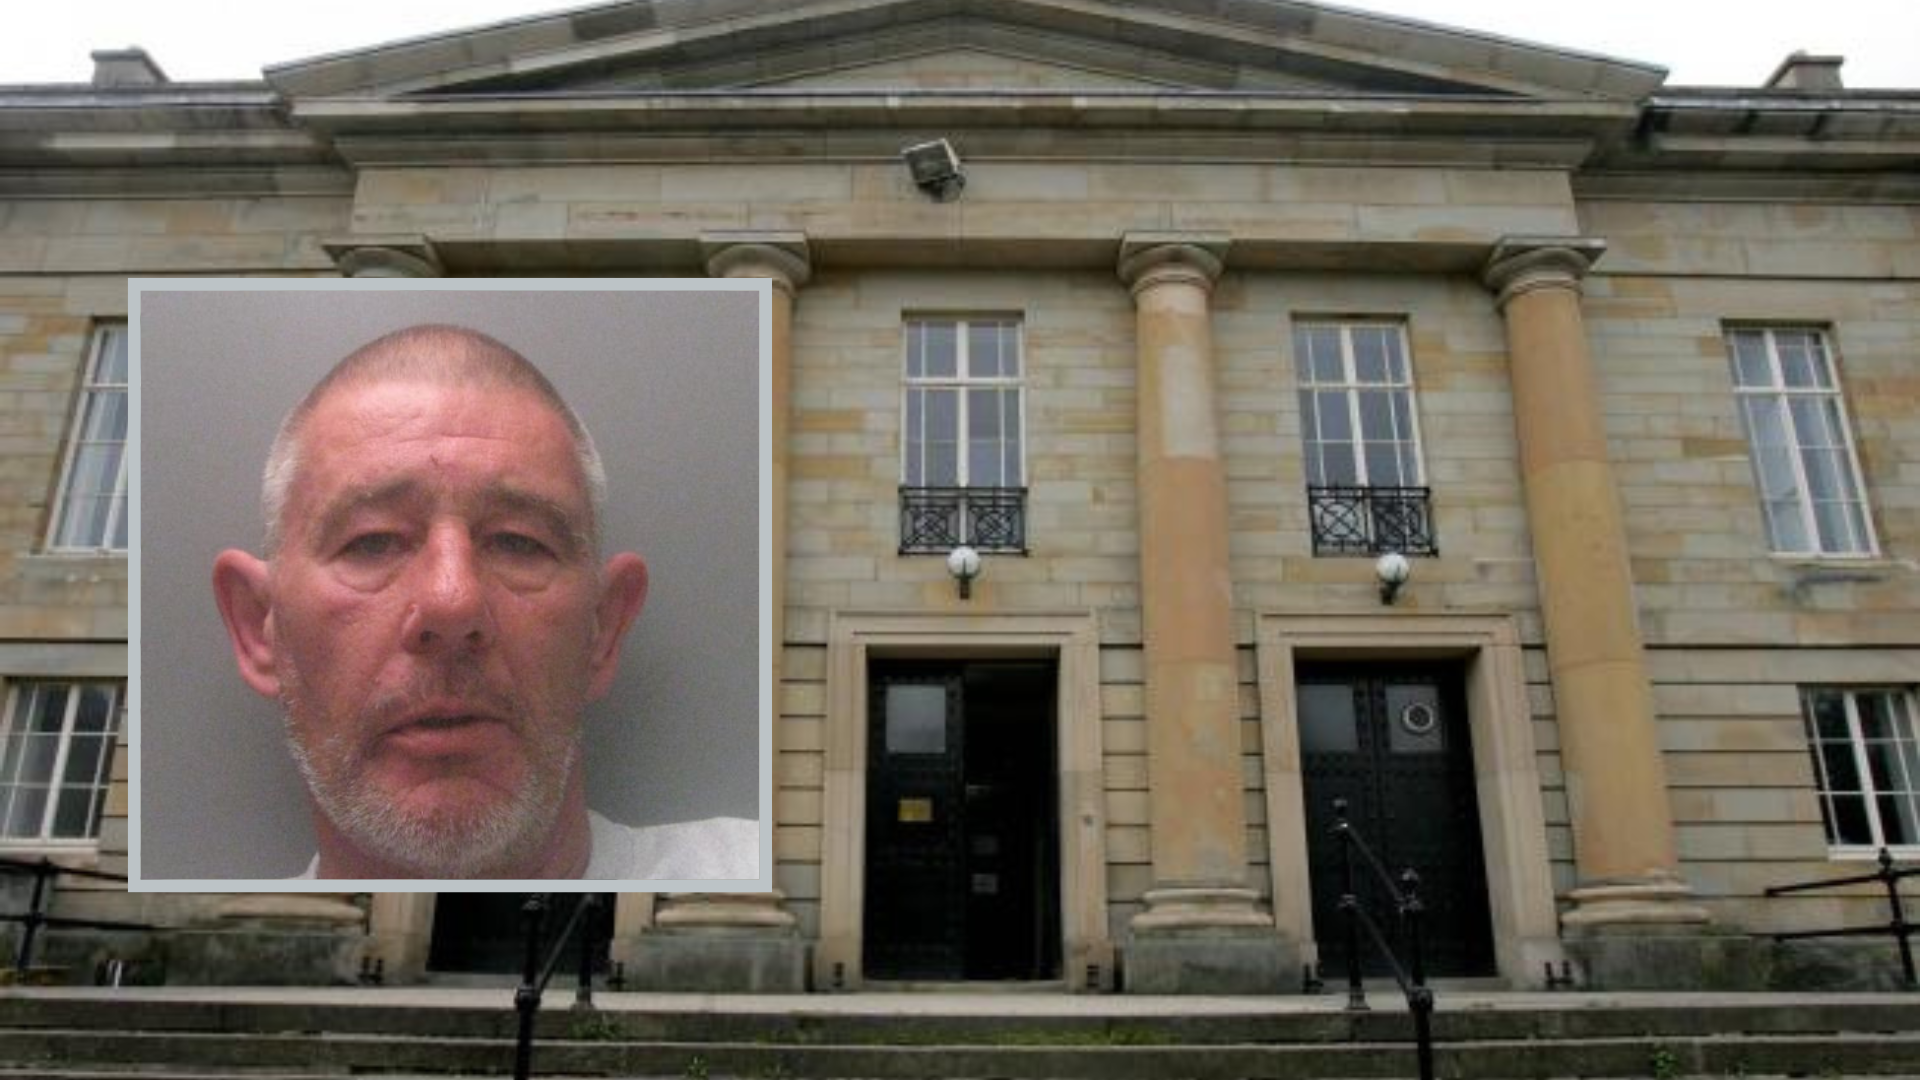 County Durham man in 50s dragged young woman upstairs and raped her The Northern Echo picture